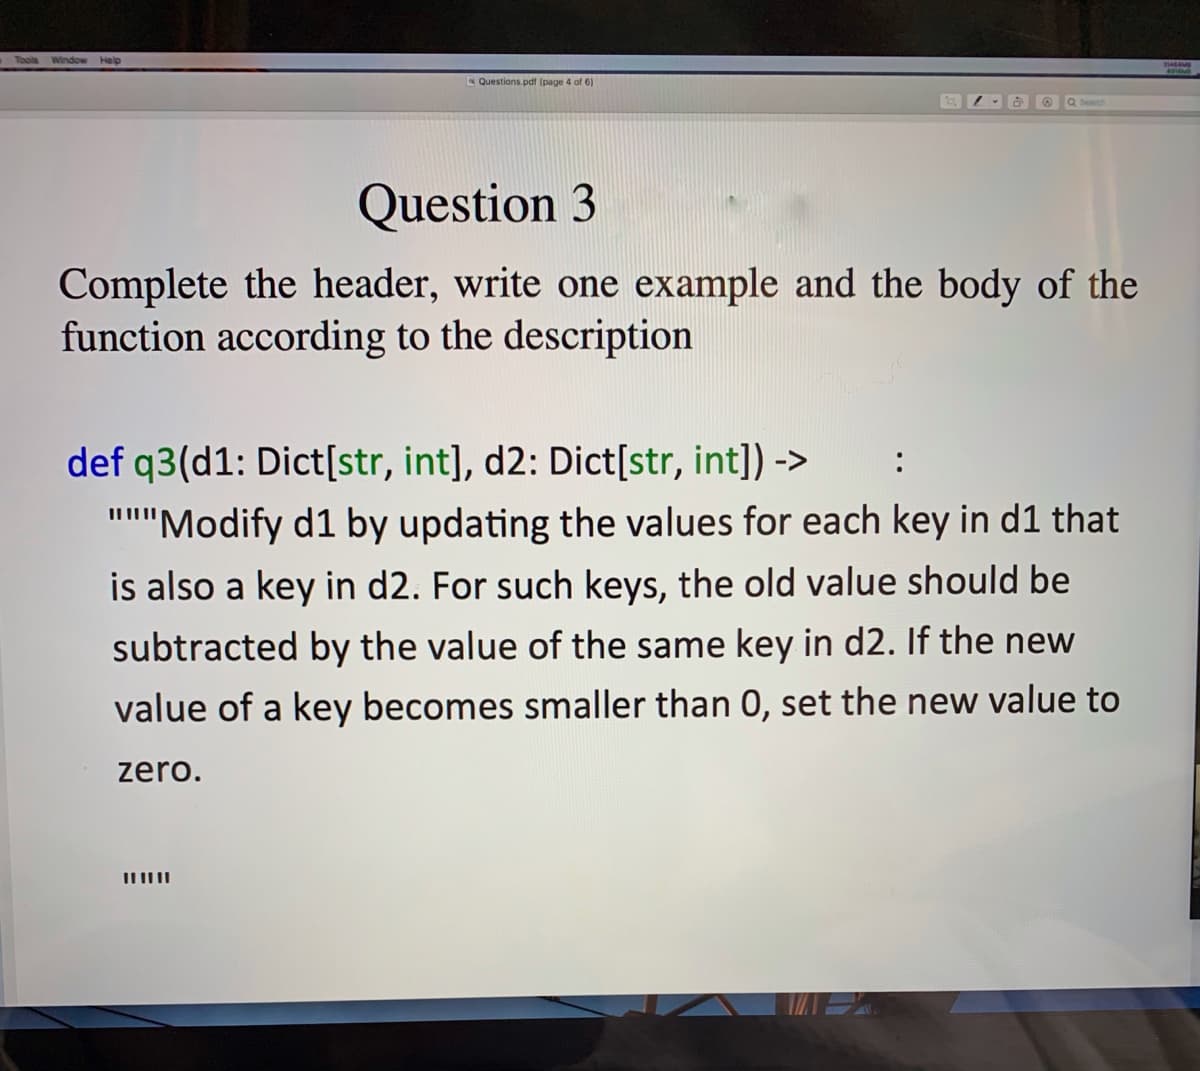 Window Help
Questions.pdf (page 4 of 6)
Q Search
Question 3
Complete the header, write one example and the body of the
function according to the description
def q3(d1: Dict[str, int], d2: Dict[str, int]) ->
:
"'Modify d1 by updating the values for each key in d1 that
is also a key in d2. For such keys, the old value should be
subtracted by the value of the same key in d2. If the new
value of a key becomes smaller than 0, set the new value to
zero.
